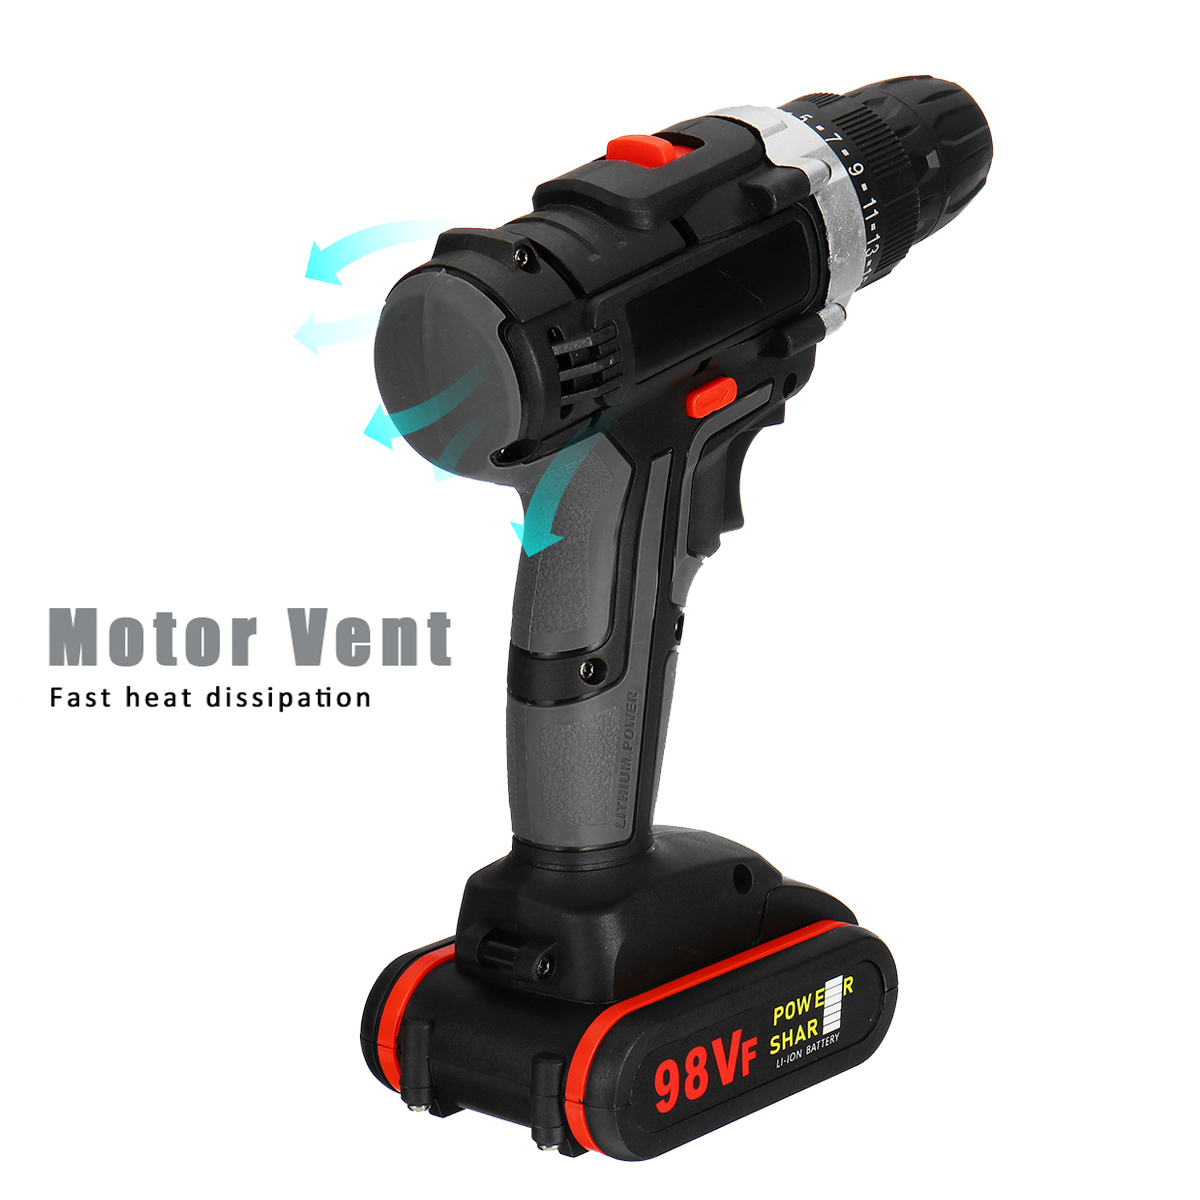 98VF-Rechargeable-Electric-Cordless-Impact-Drill-Screwdriver-251-Torque-LED-1569430-6